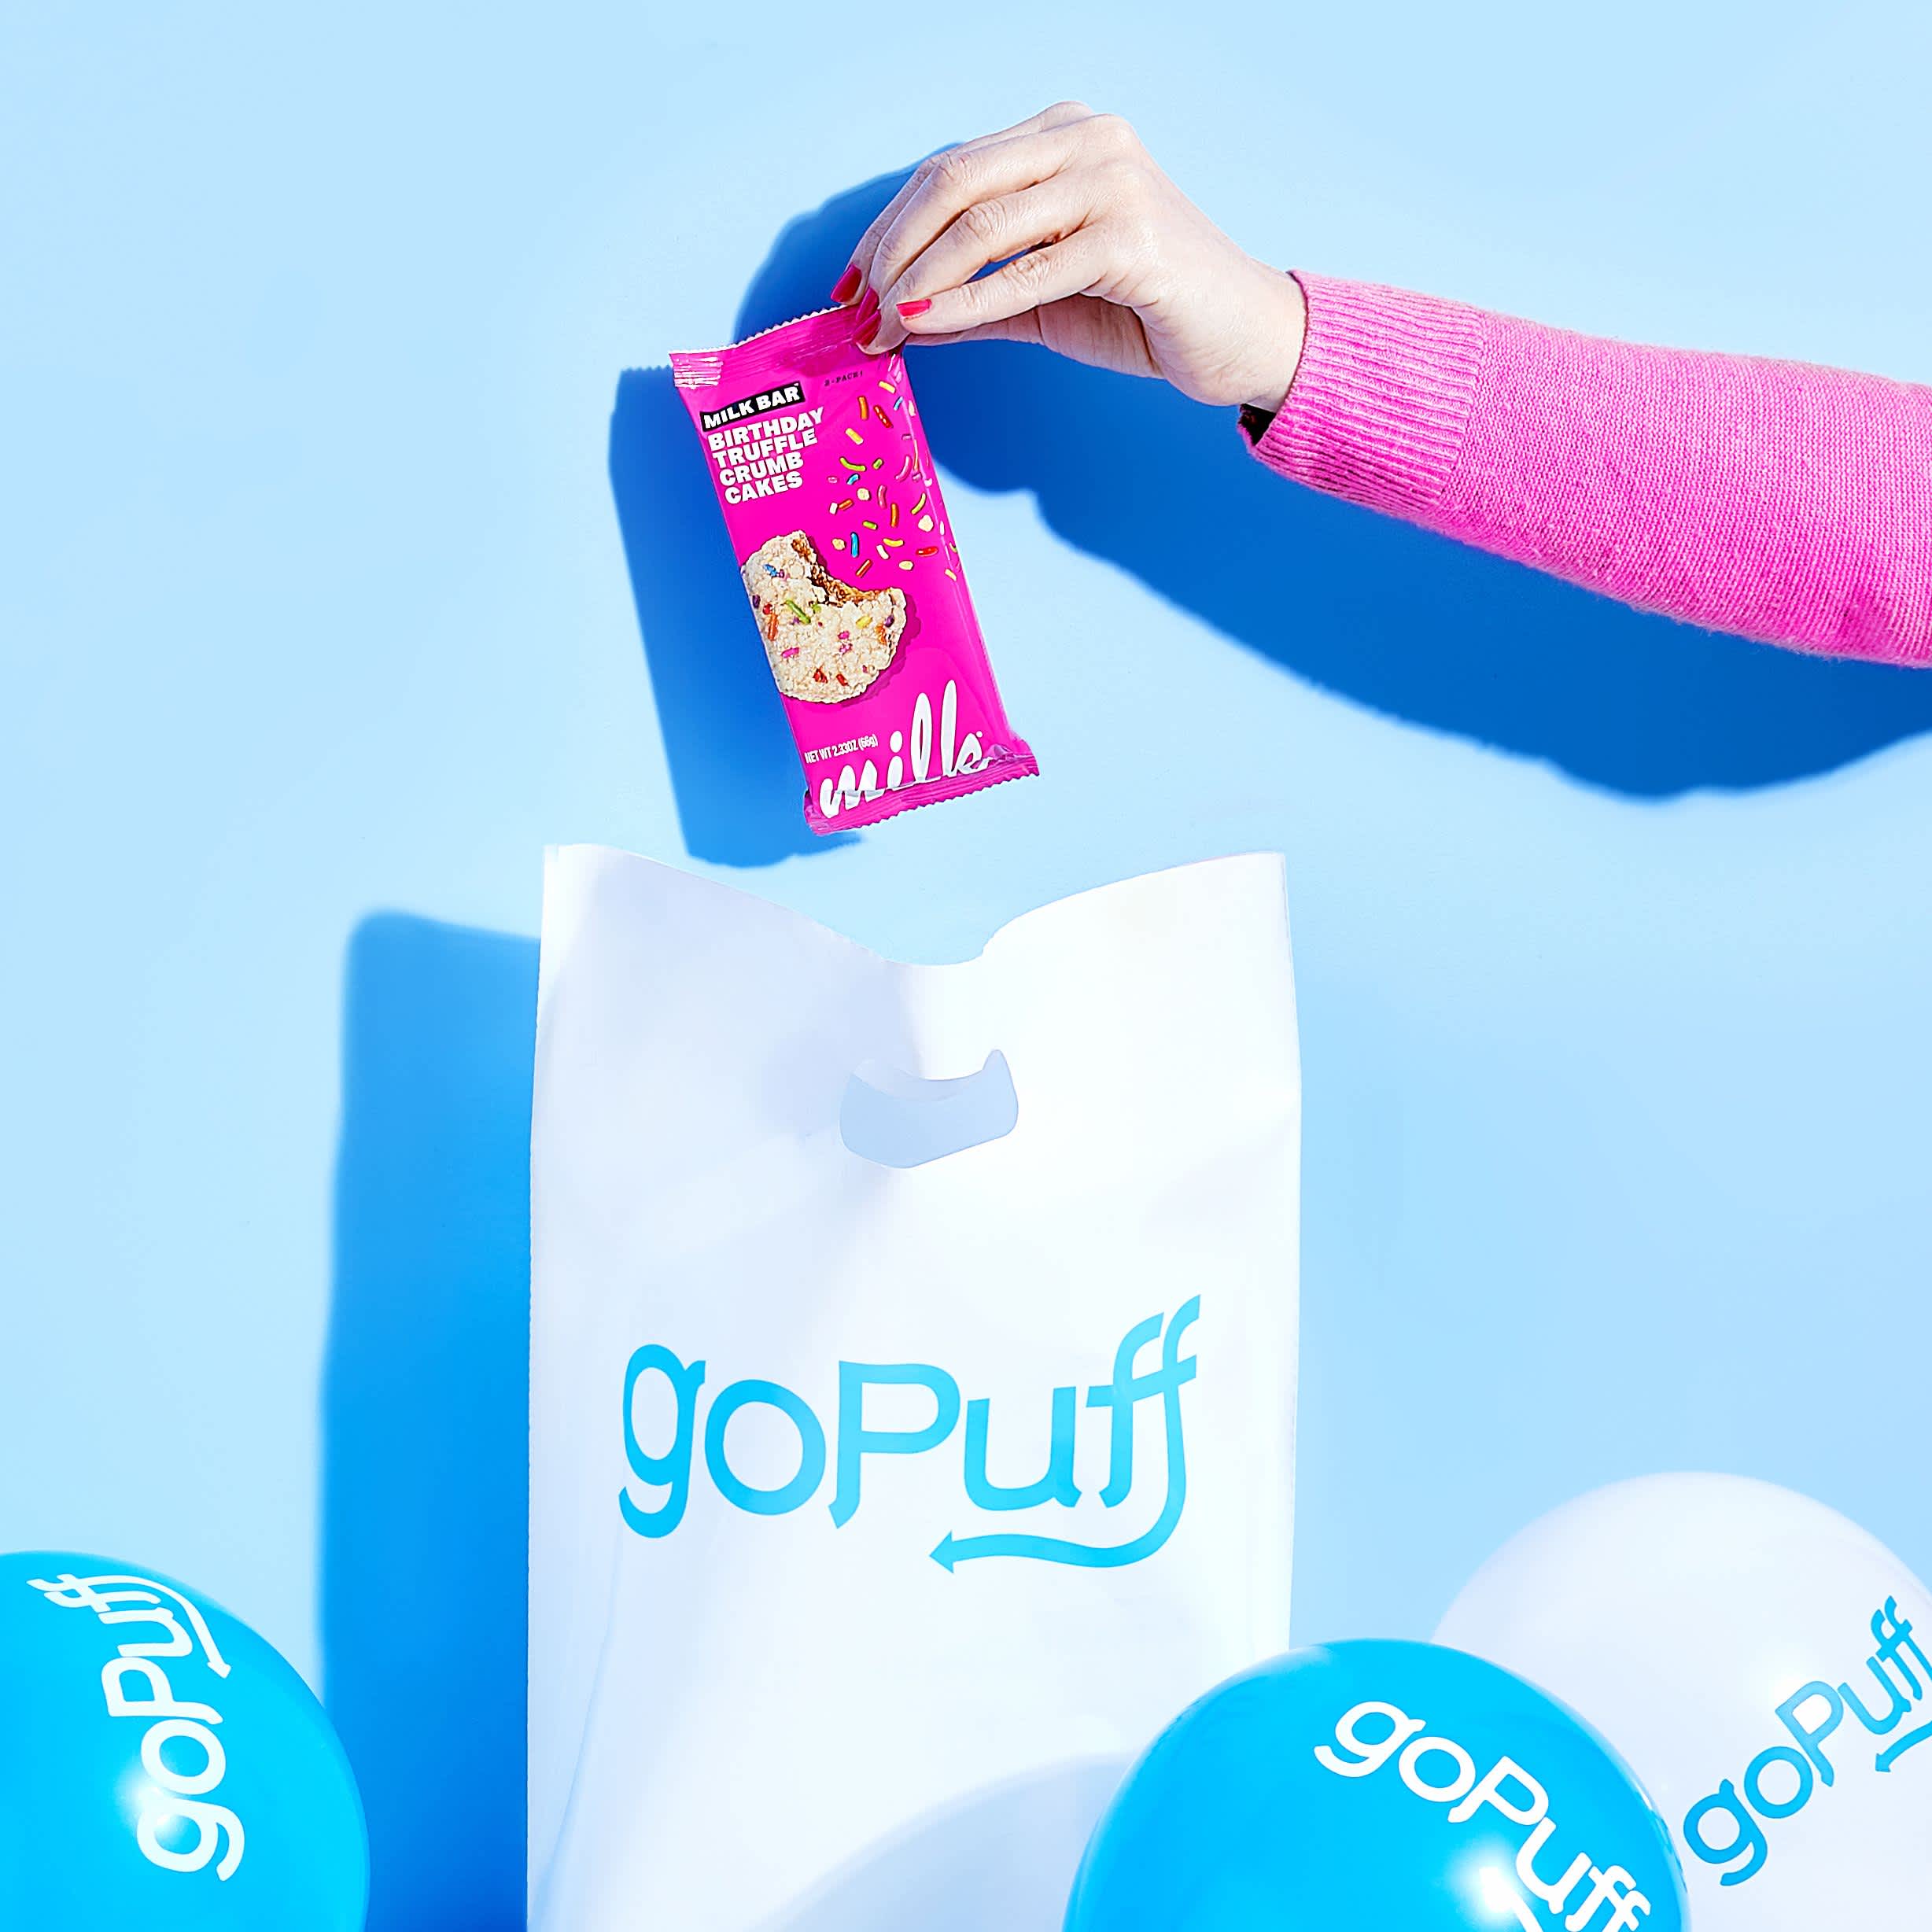 A Milk Bar being placed into a Gopuff bag surrounded by balloons for the 7th Gopuff anniversary